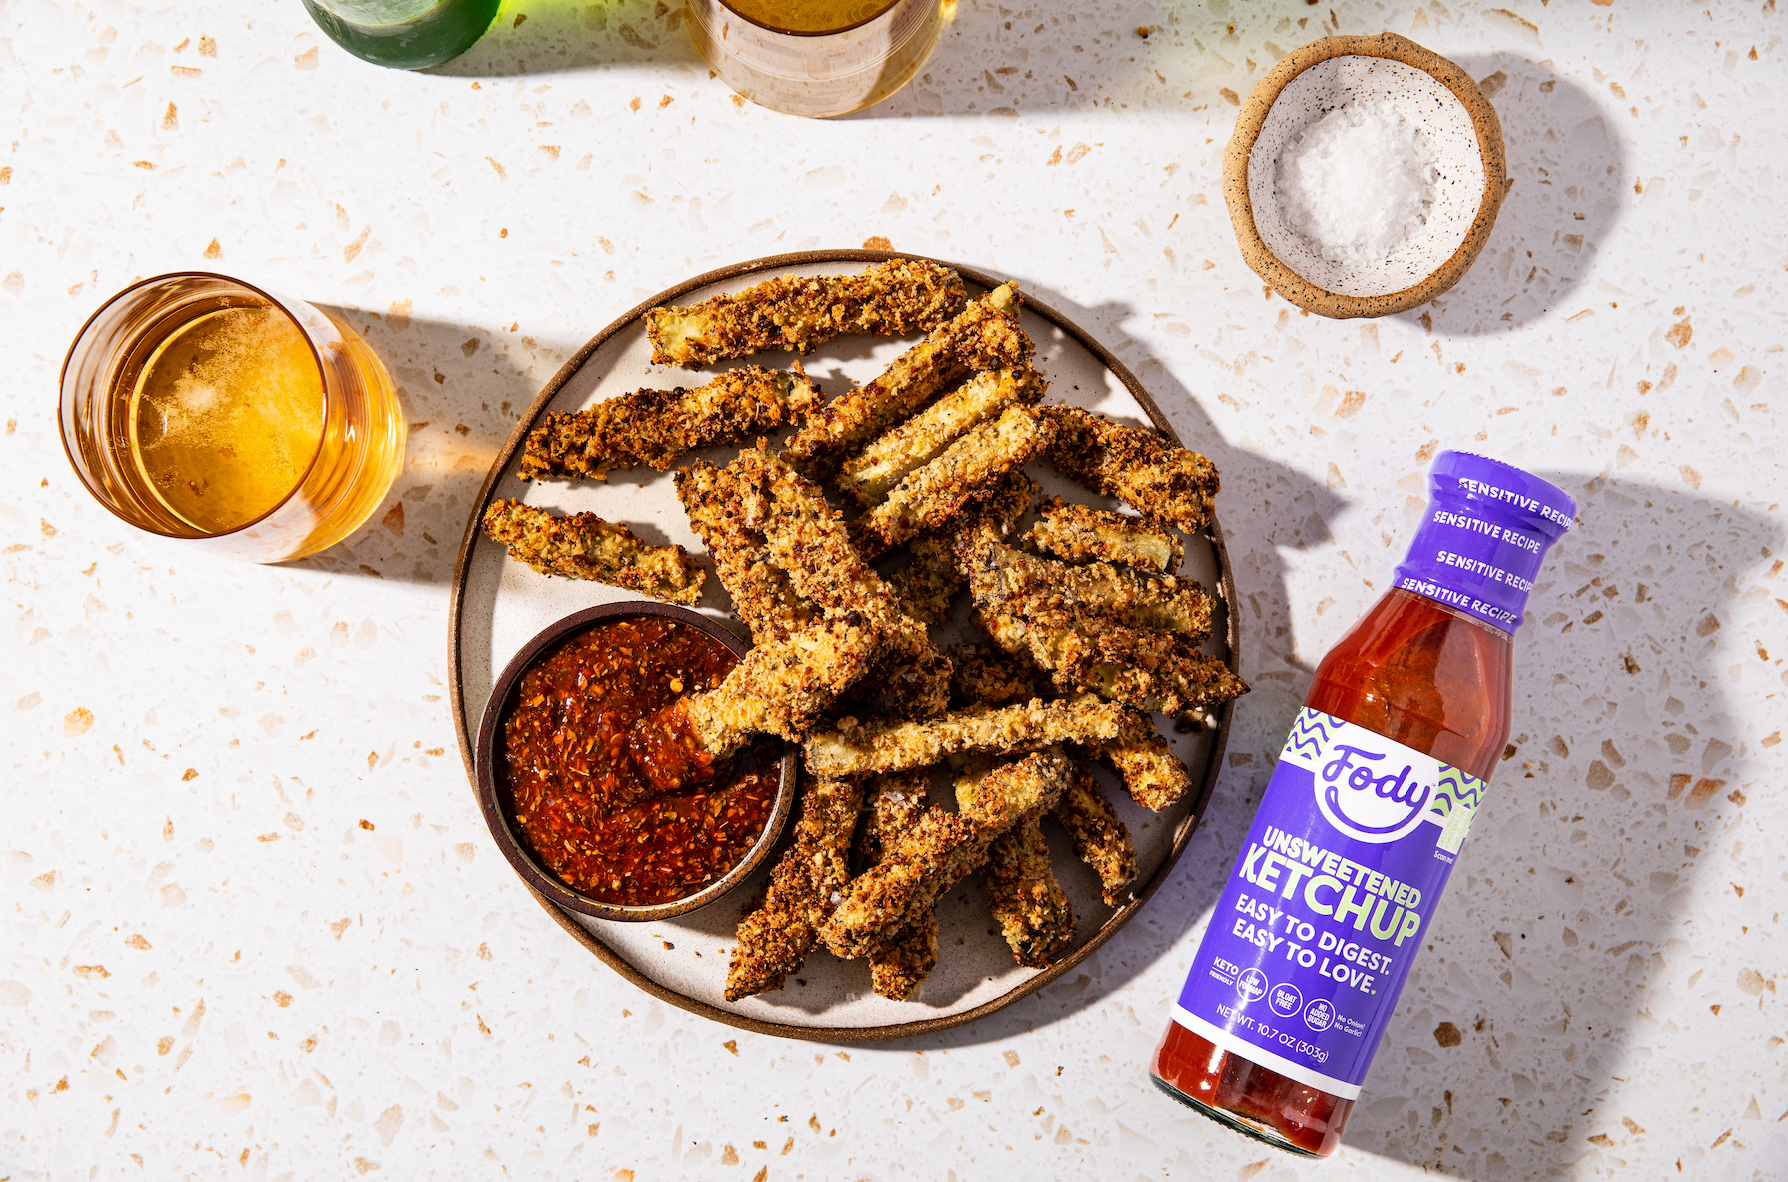 Fody’s Air Fryer Eggplant Fries with Italian Herb Ketchup